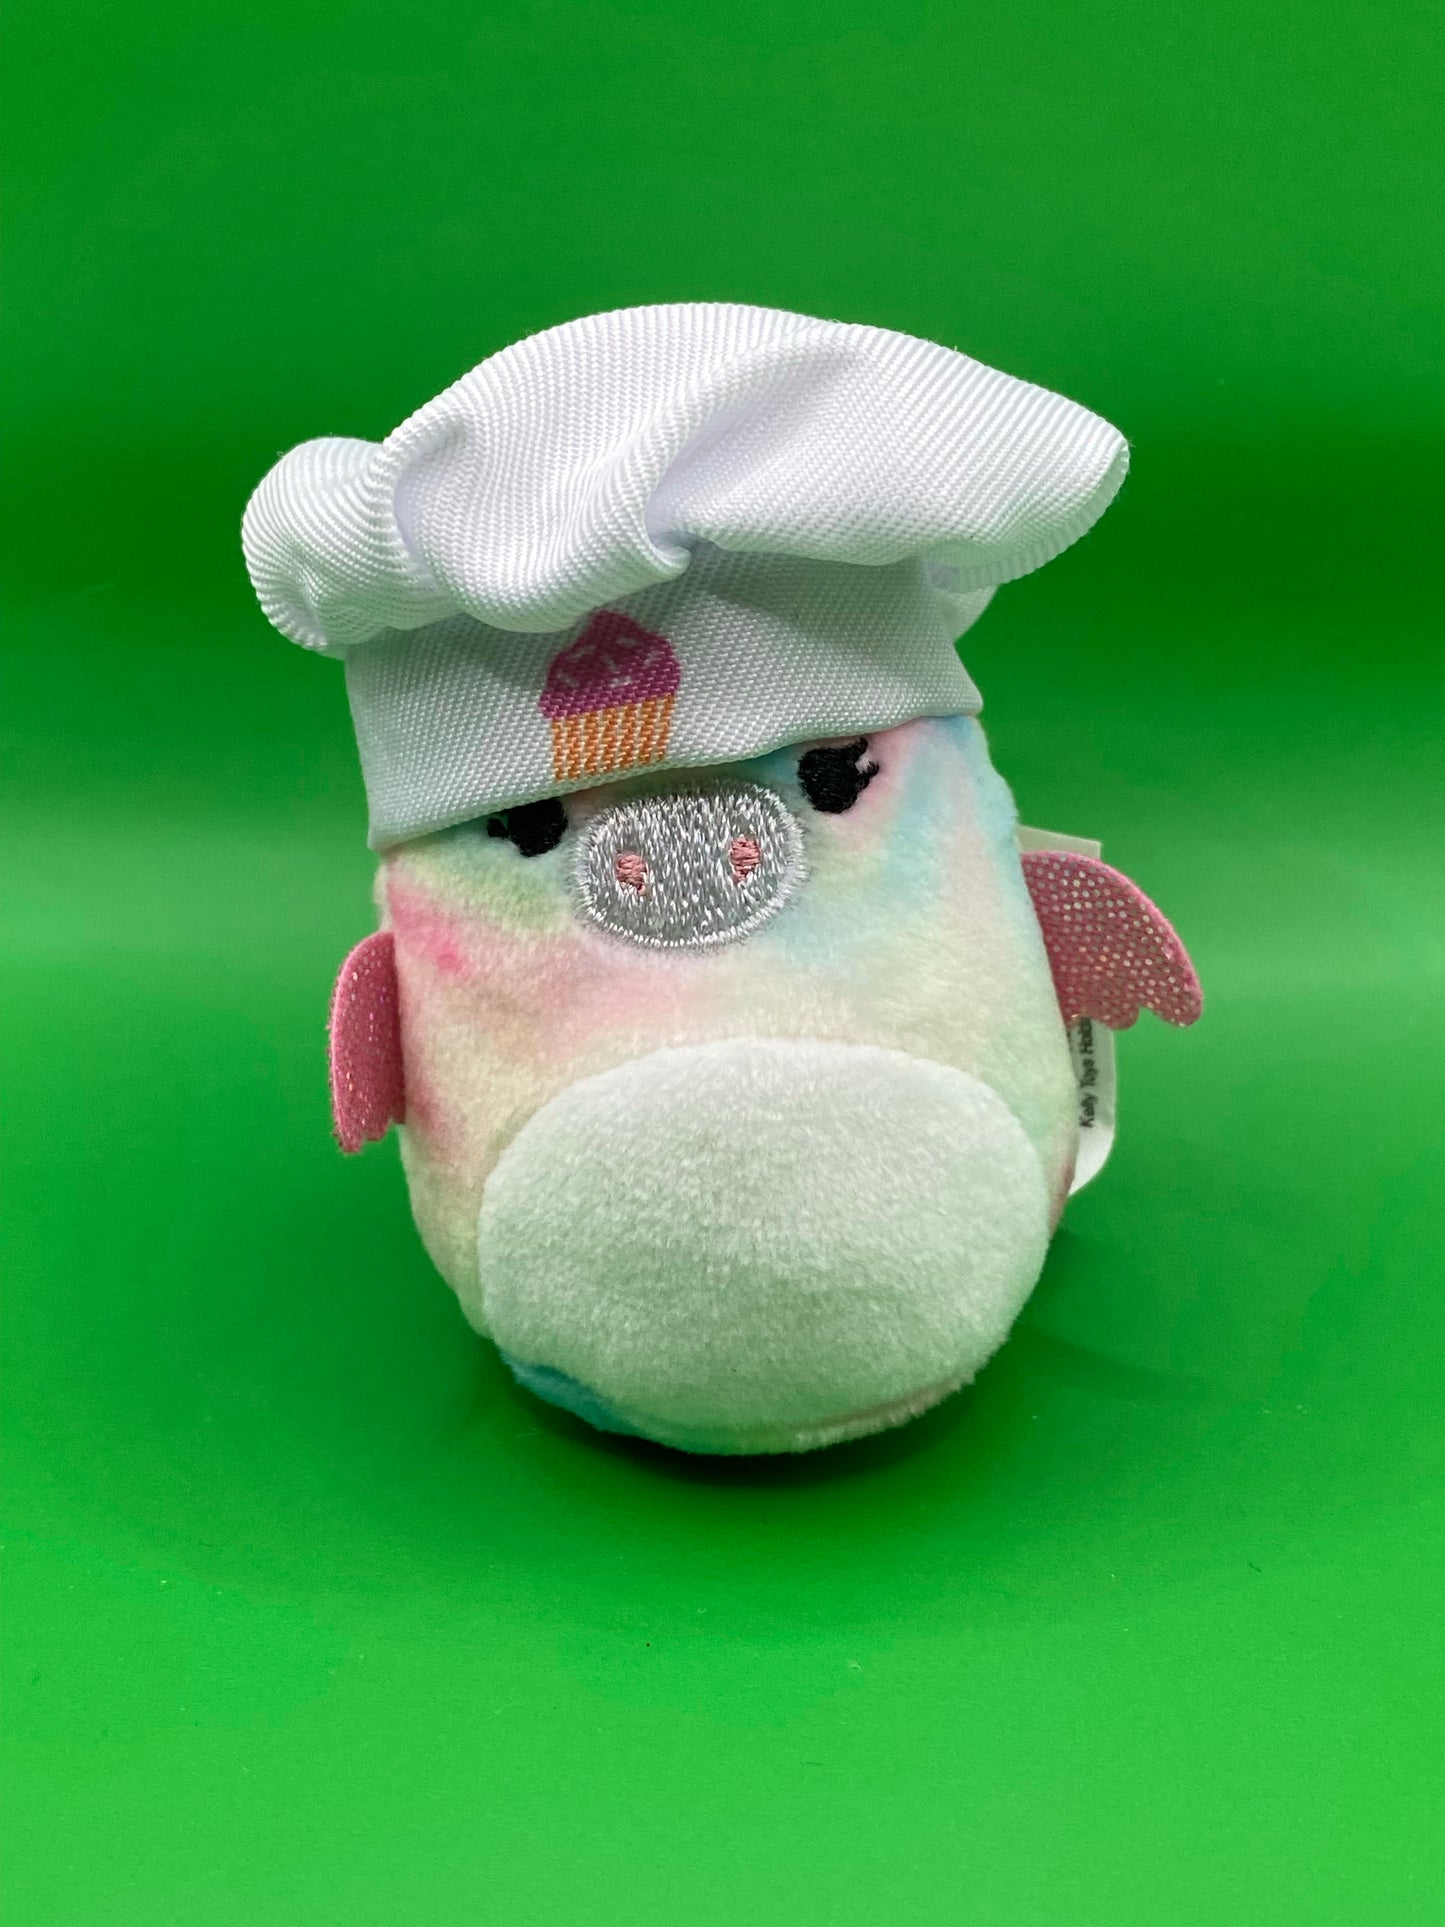 Tie Dye PegaCorn with Cupcake Chef Hat ~ 2" Individual Squishville by Squishmall